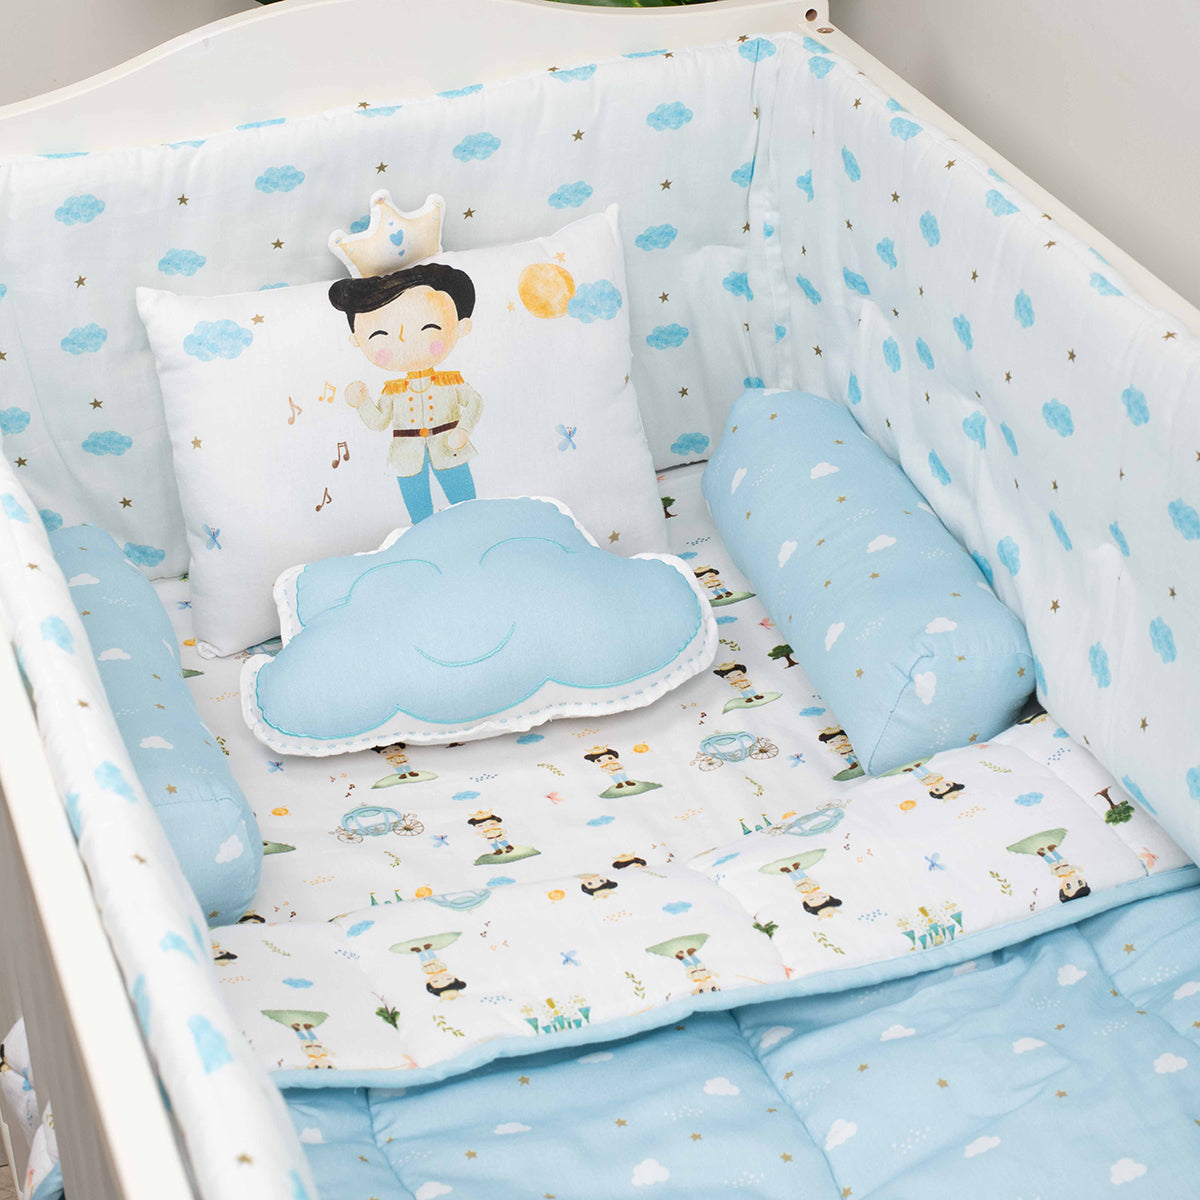 Tiny Snooze Cot Bedding Set – The Little Prince